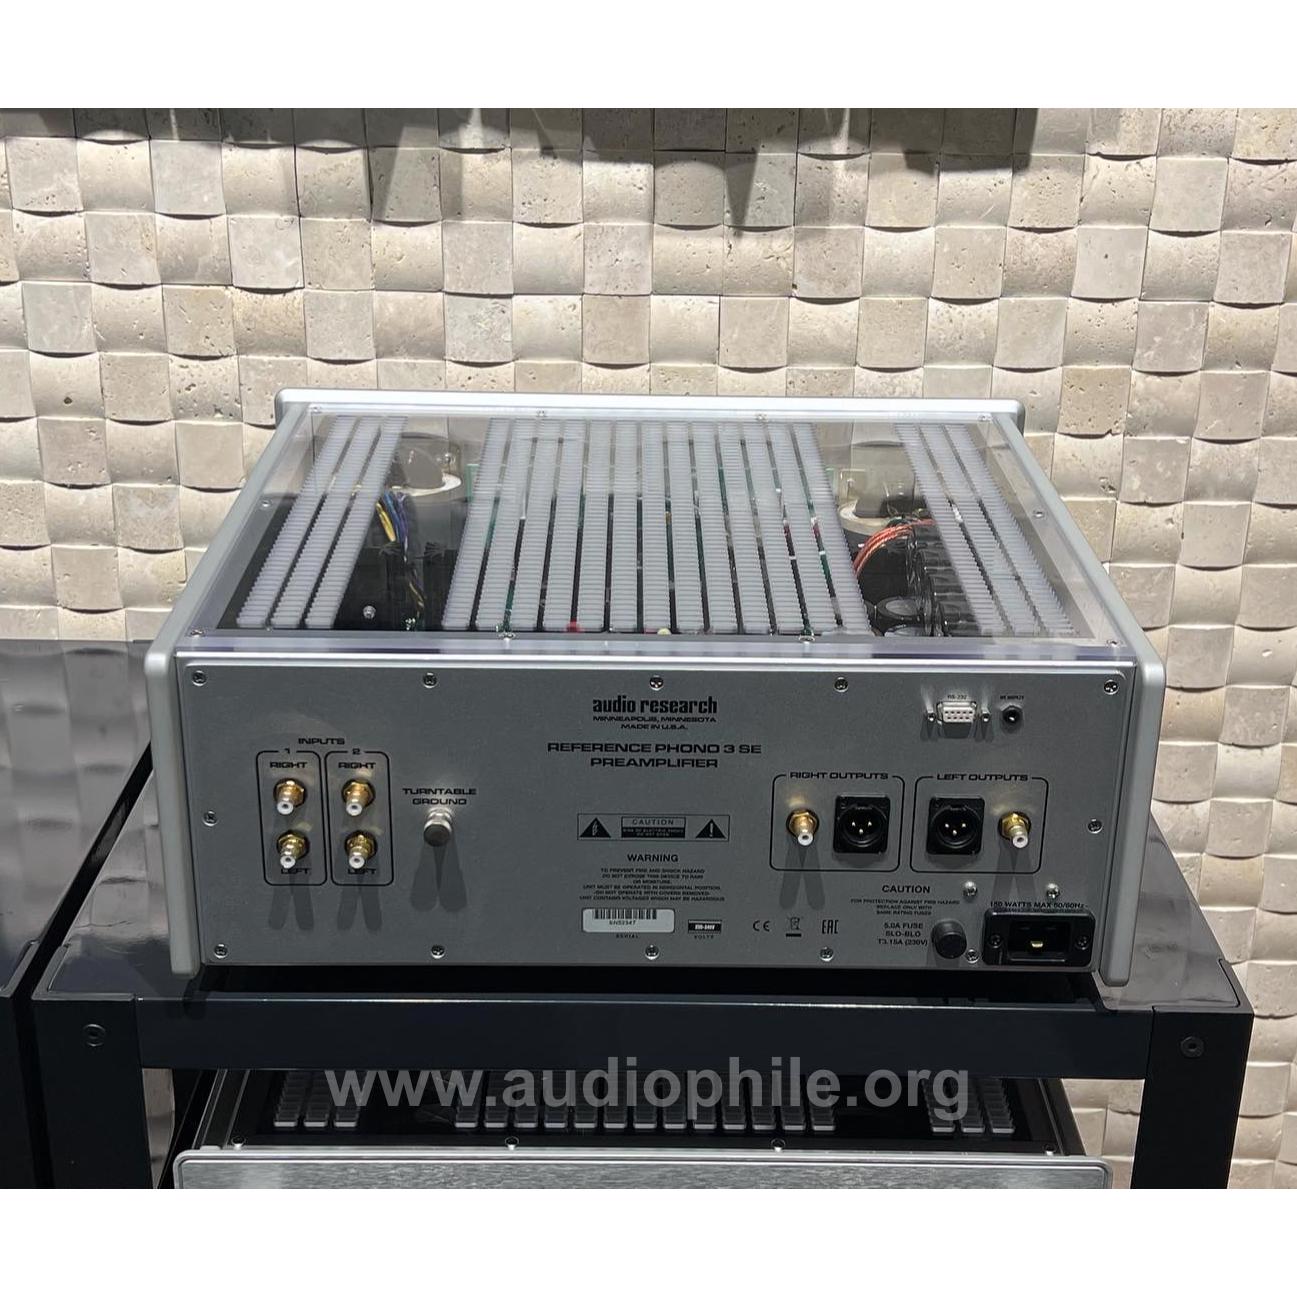 Audio research reference phono 3se phono stage